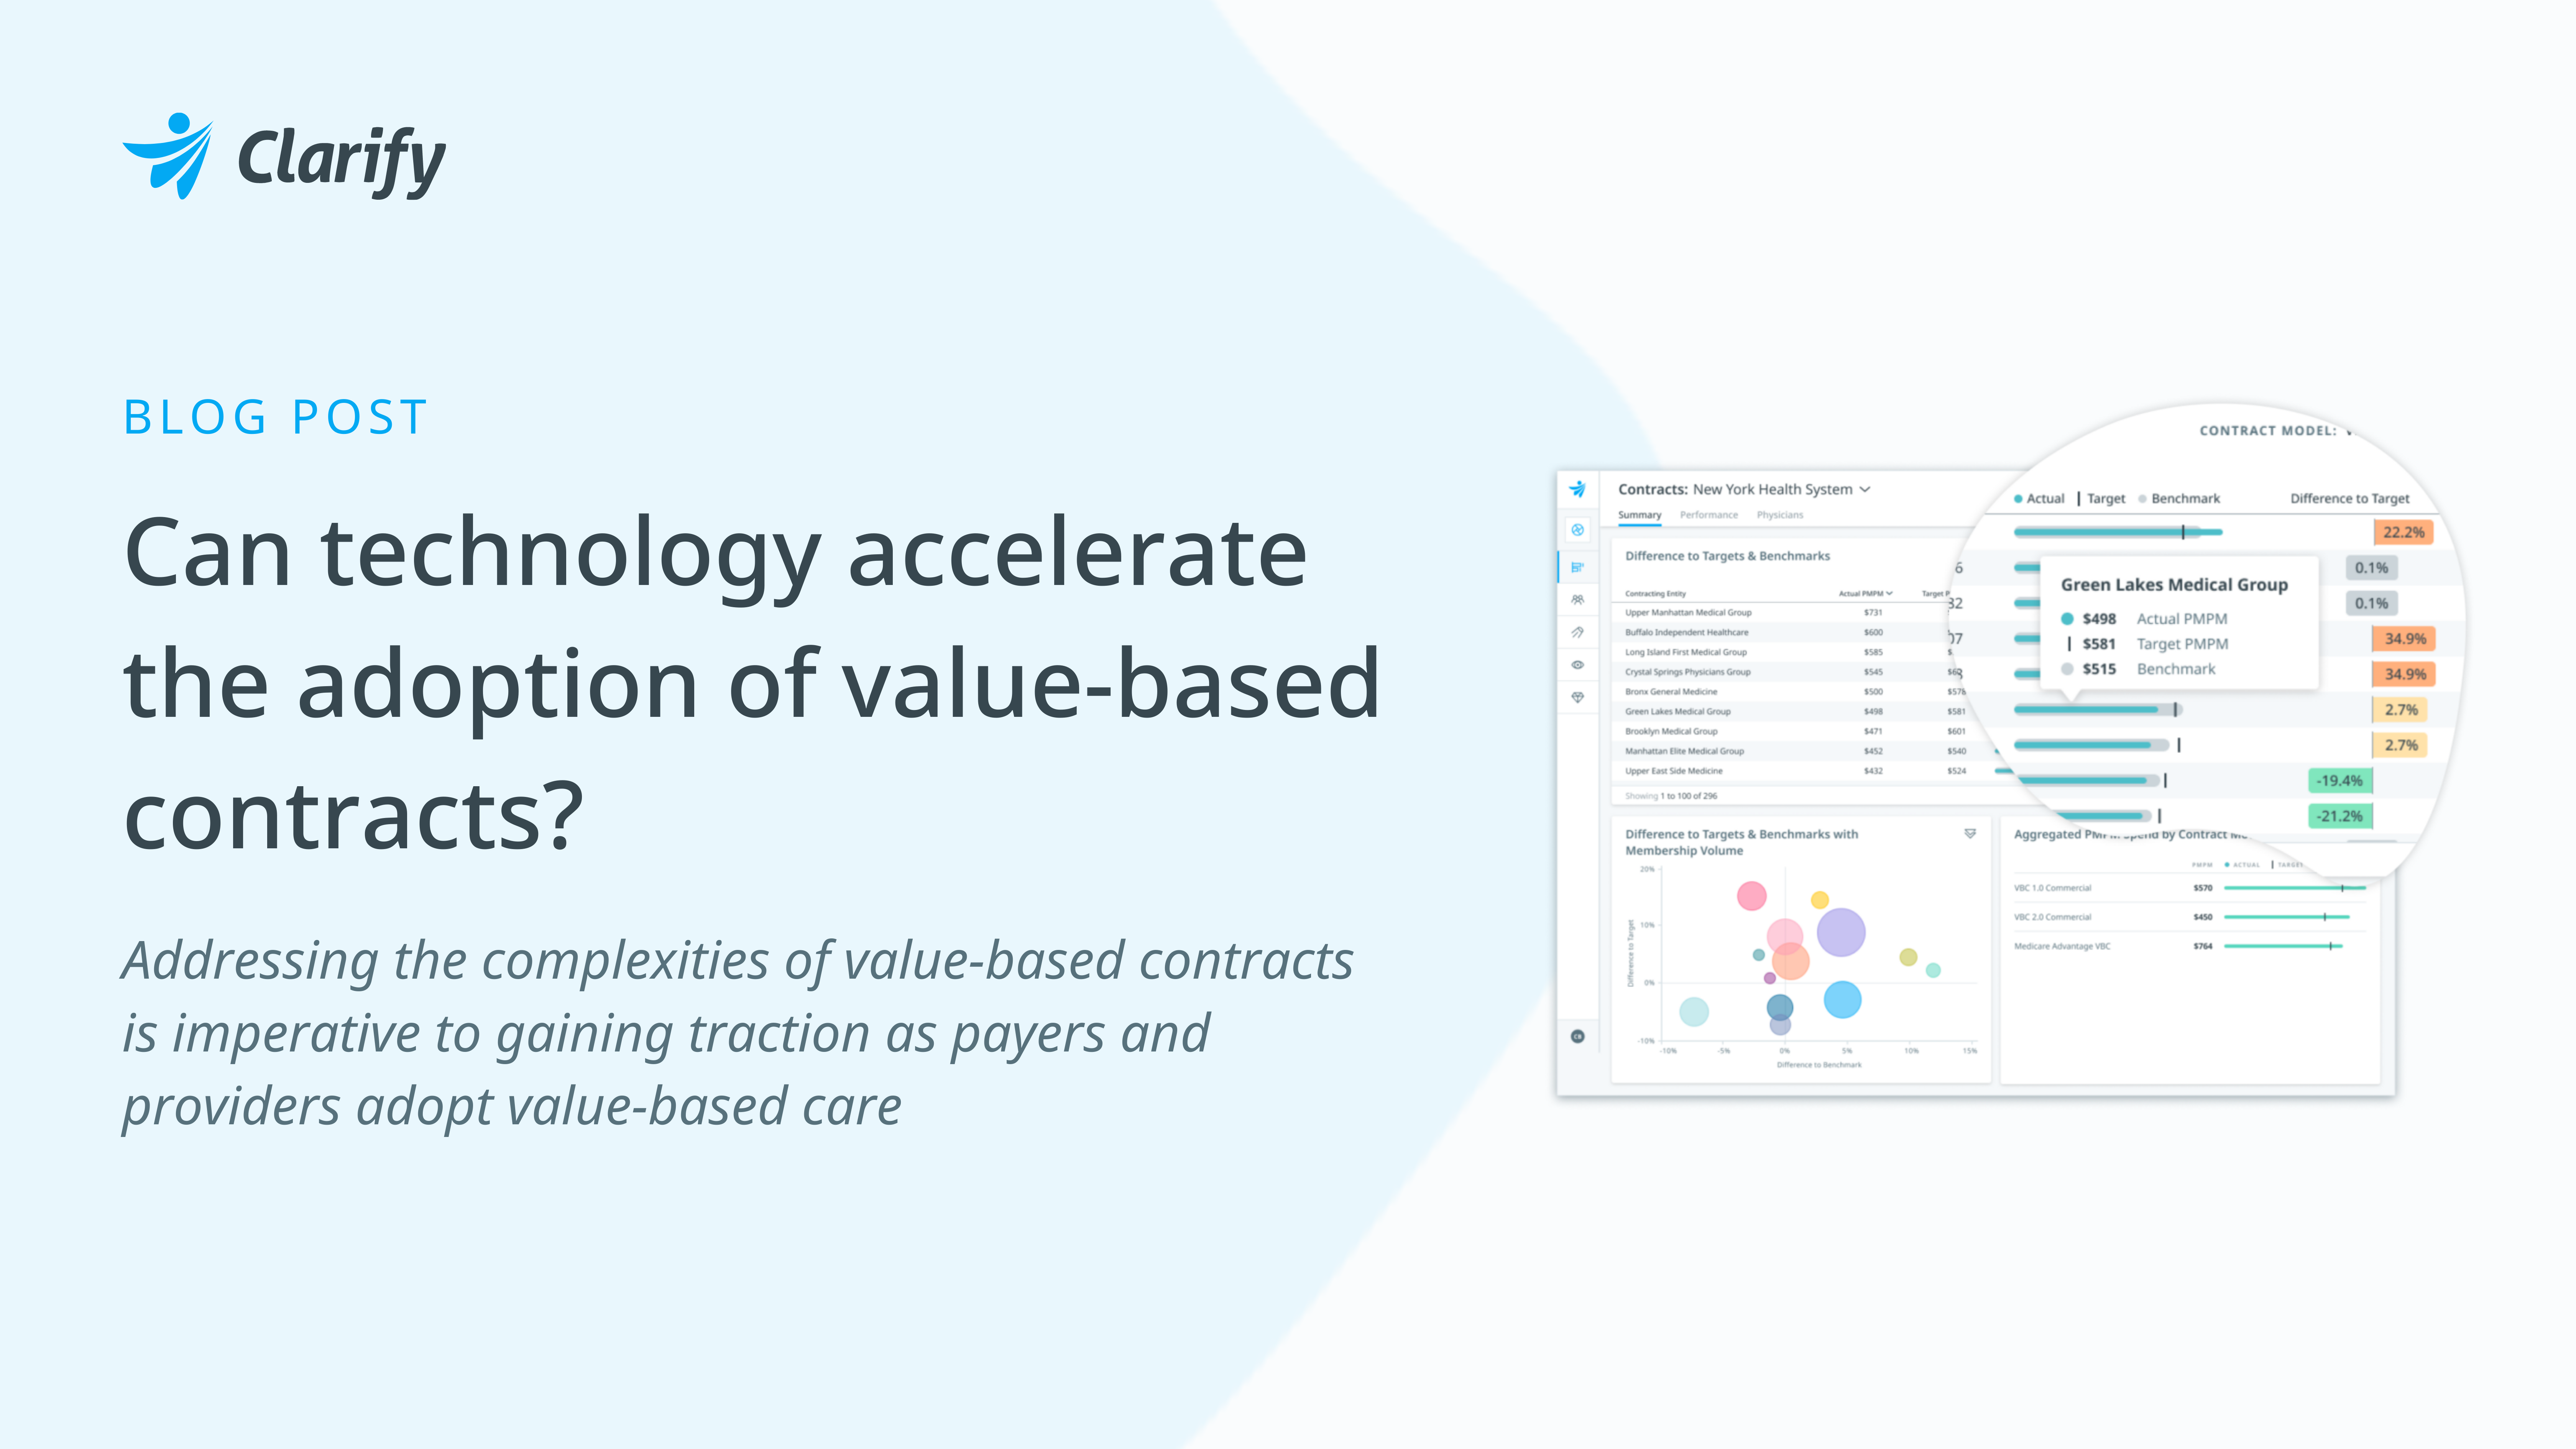 Can technology accelerate the adoption of value-based contracts?